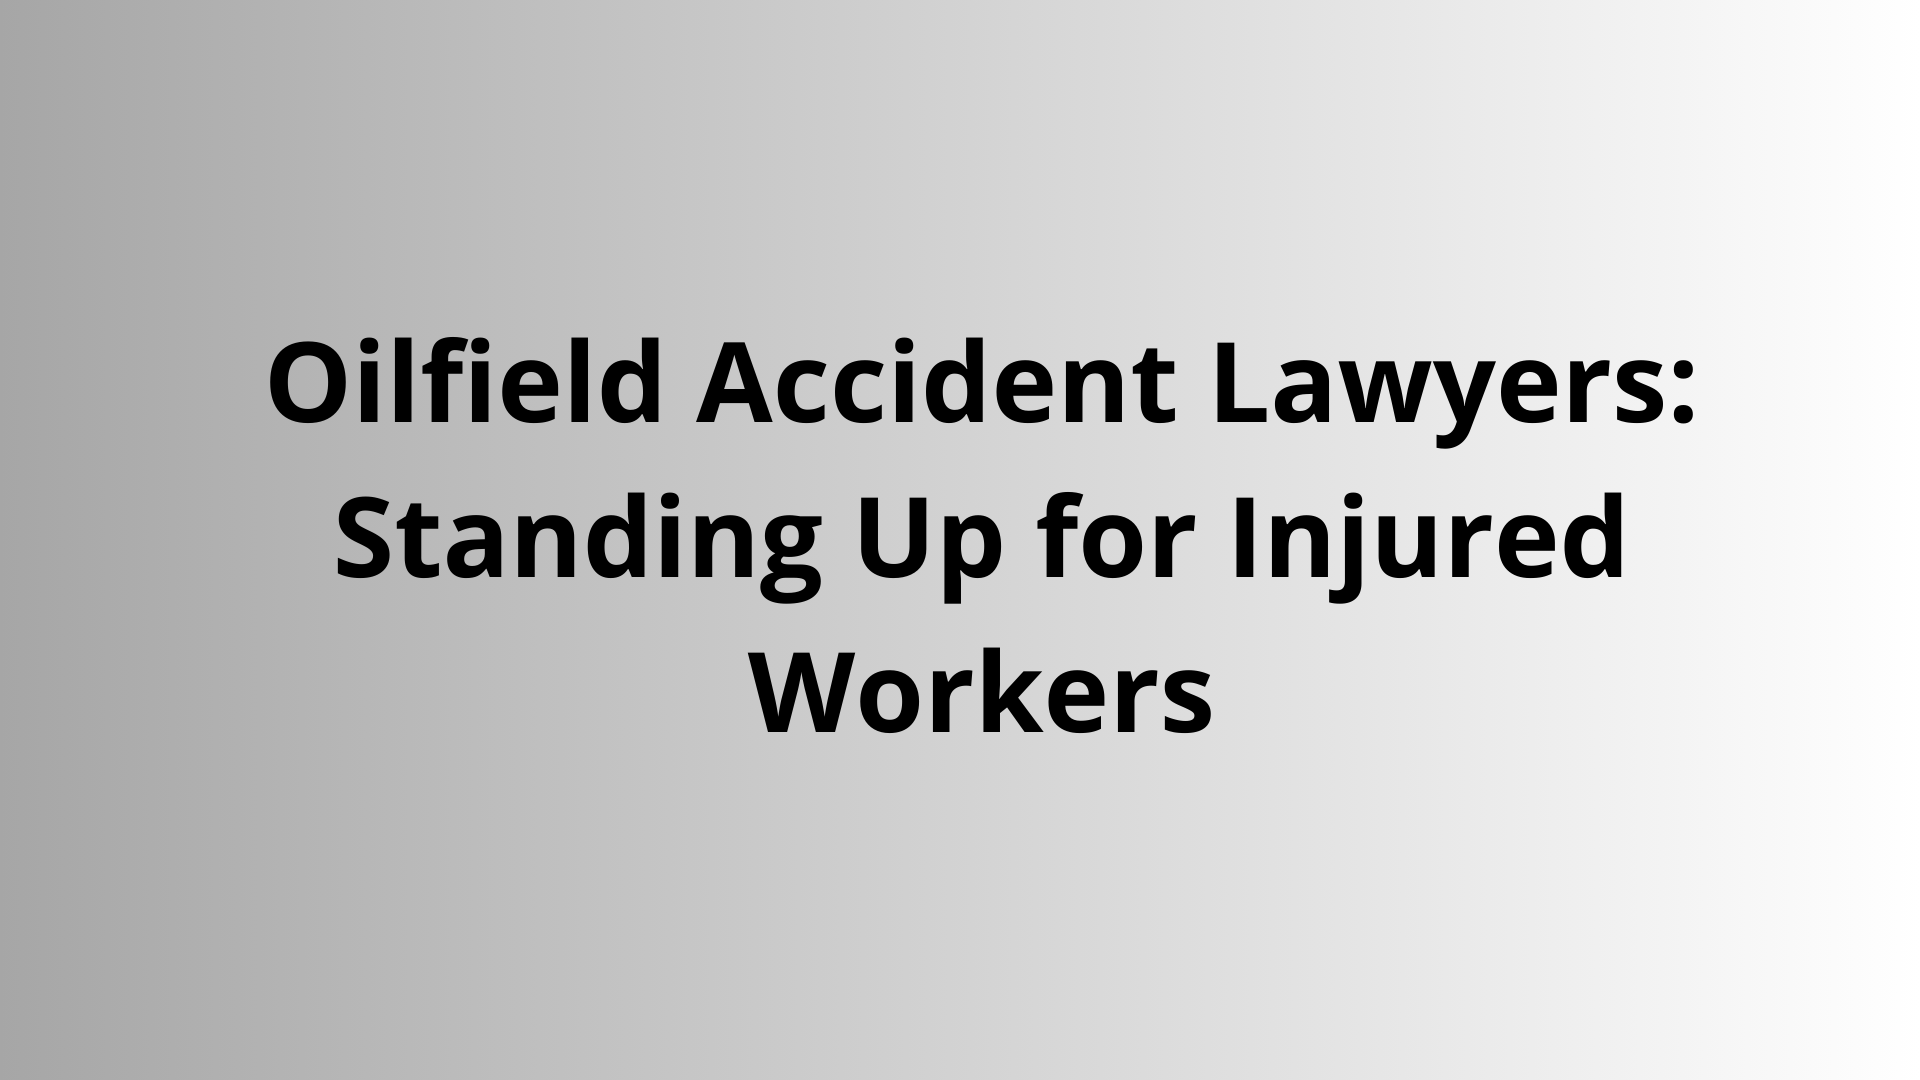 Oilfield Accident Lawyers: Standing Up for Injured Workers